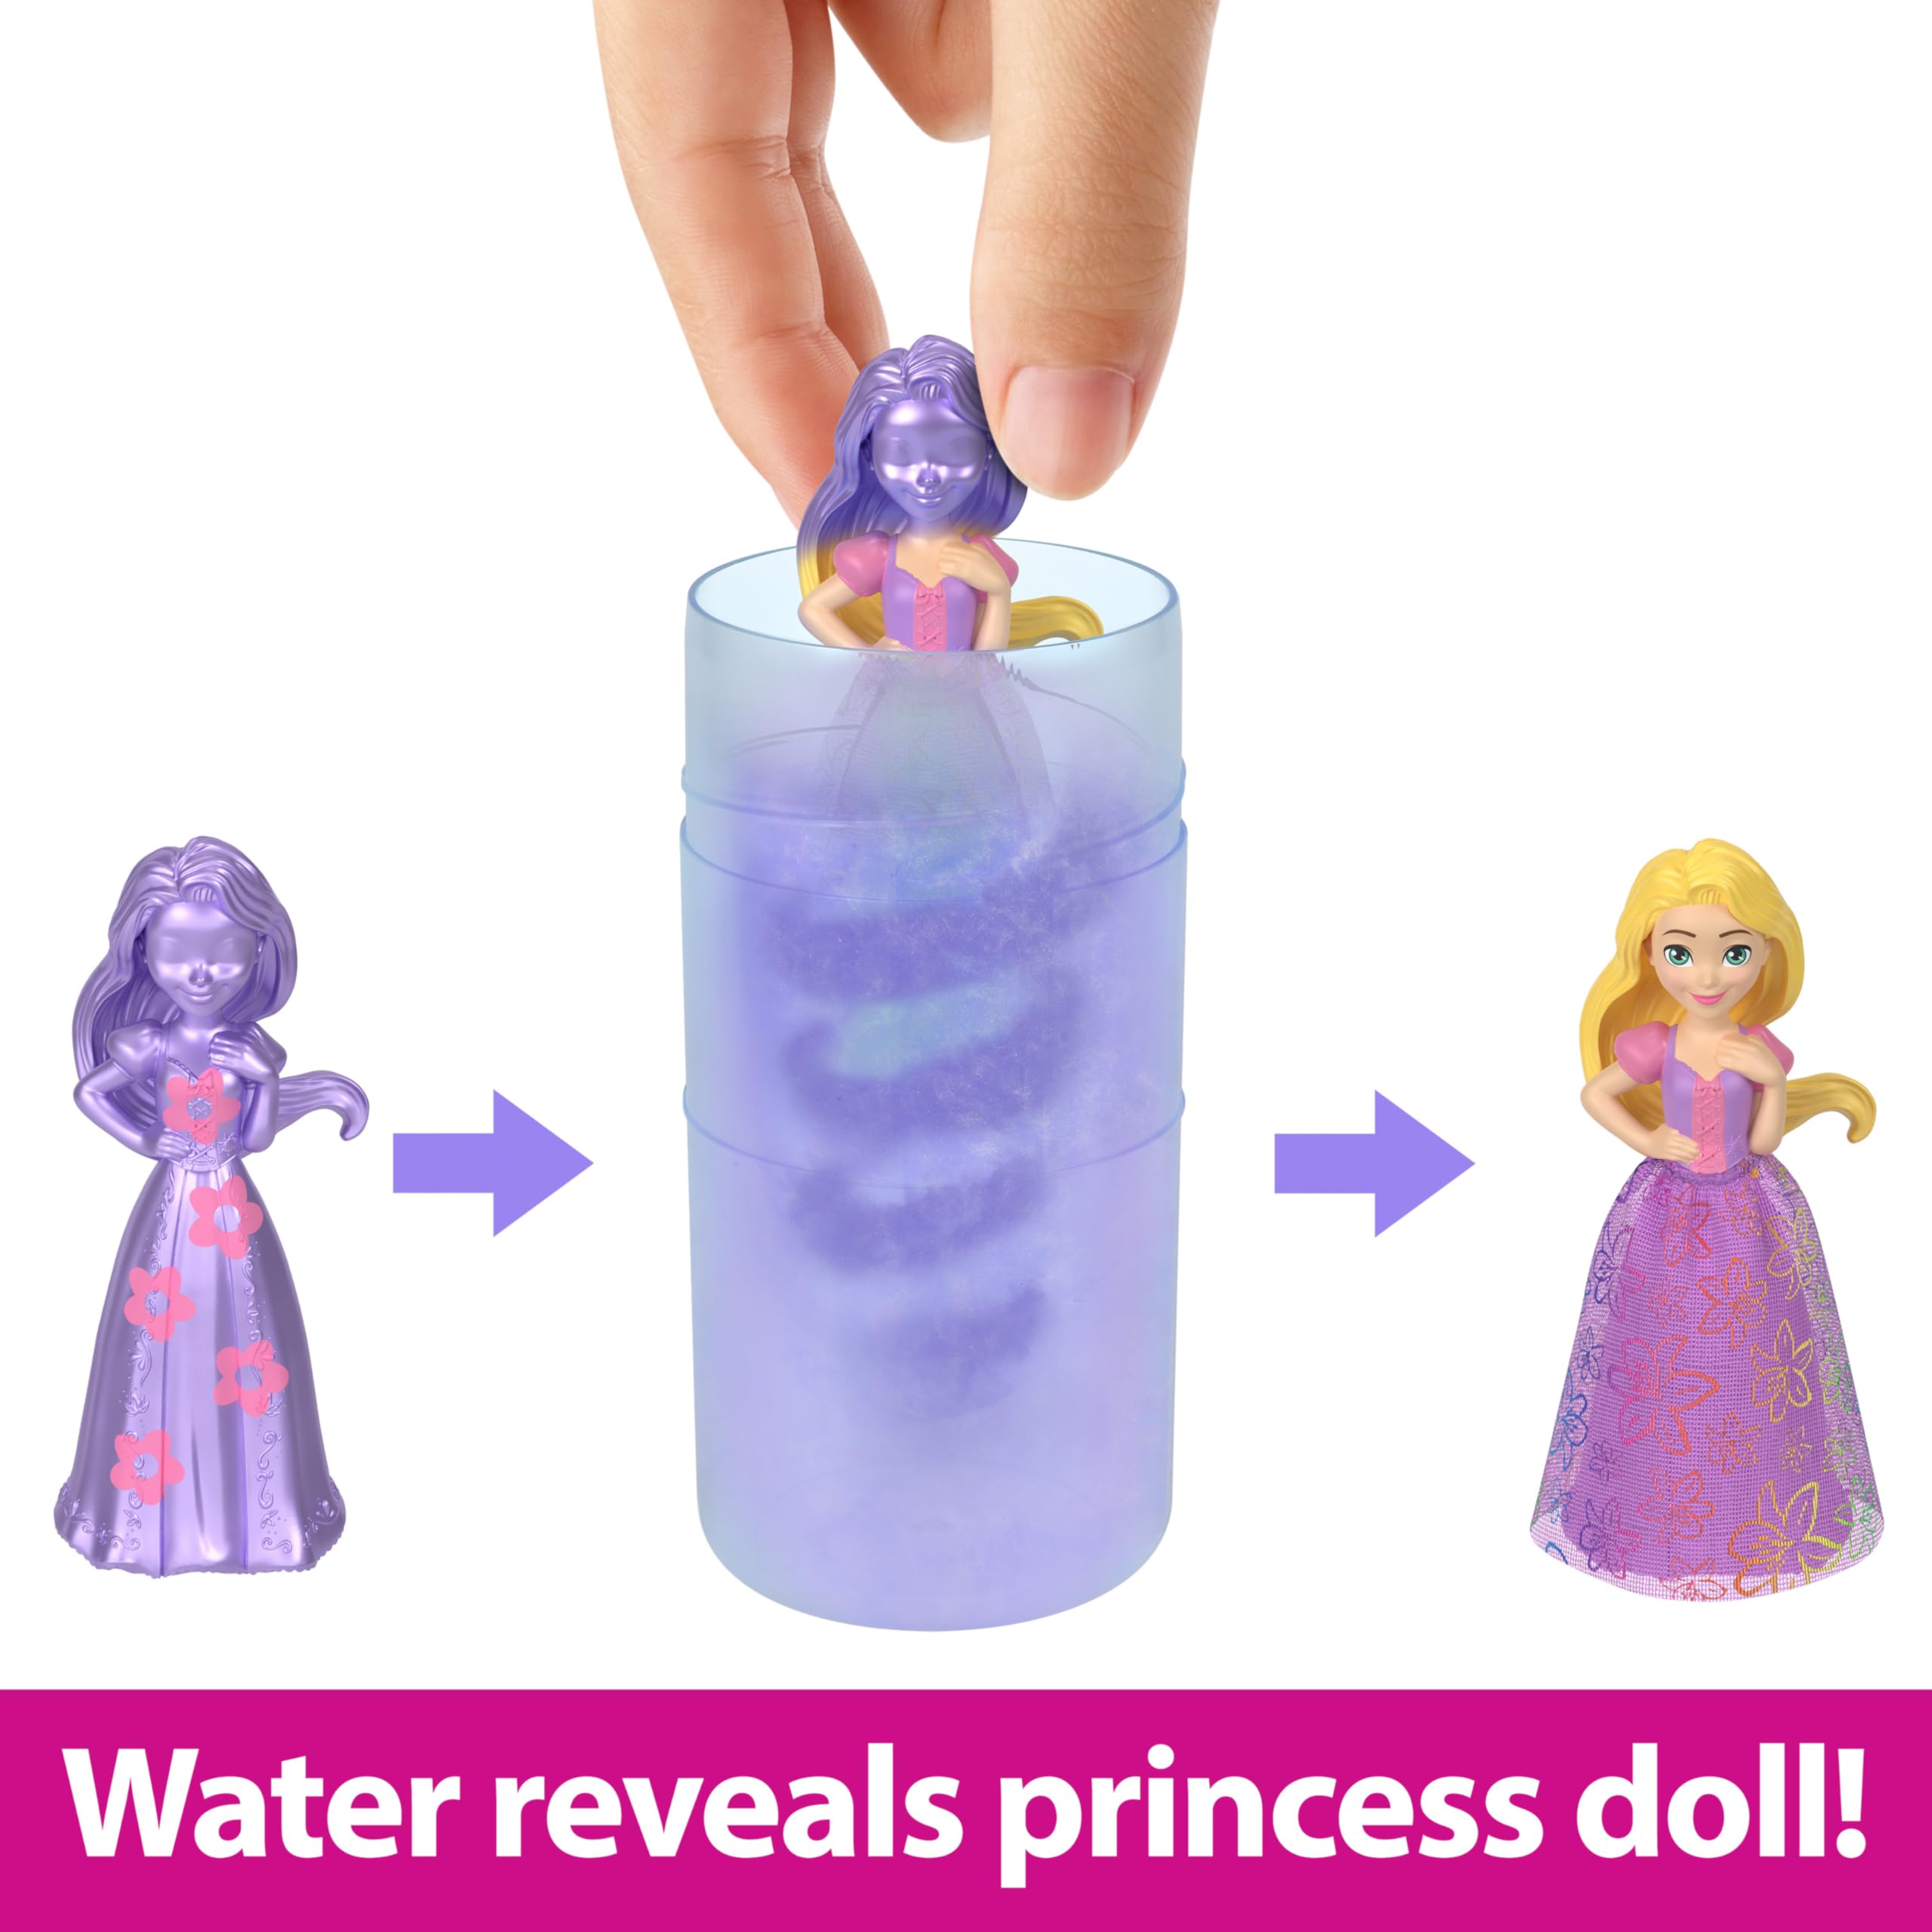 Mattel Disney Princess Small Doll Royal Color Reveal with 6 Surprises Including Scented Ring and 4 Accessories (Dolls May Vary), Garden Party Series